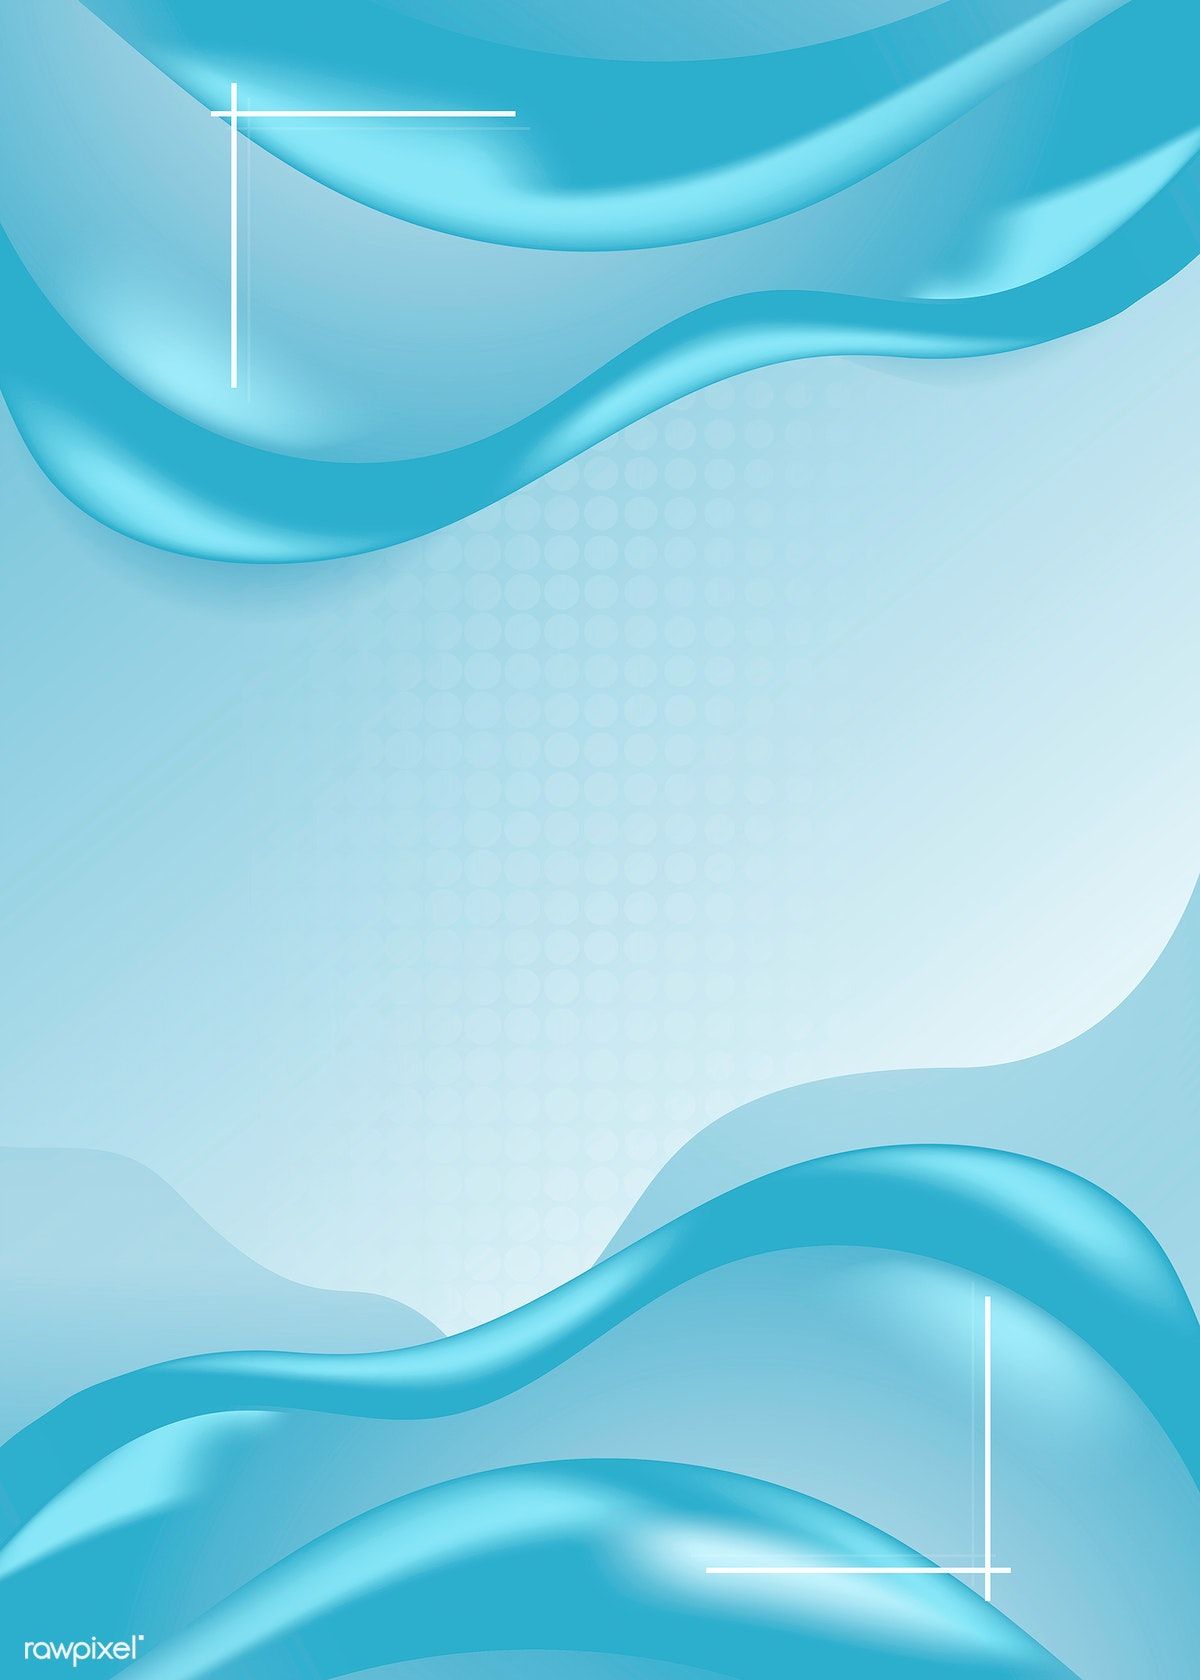 Blue abstract background design vector. free image / sasi. Background design vector, Blue abstract background, Abstract background design